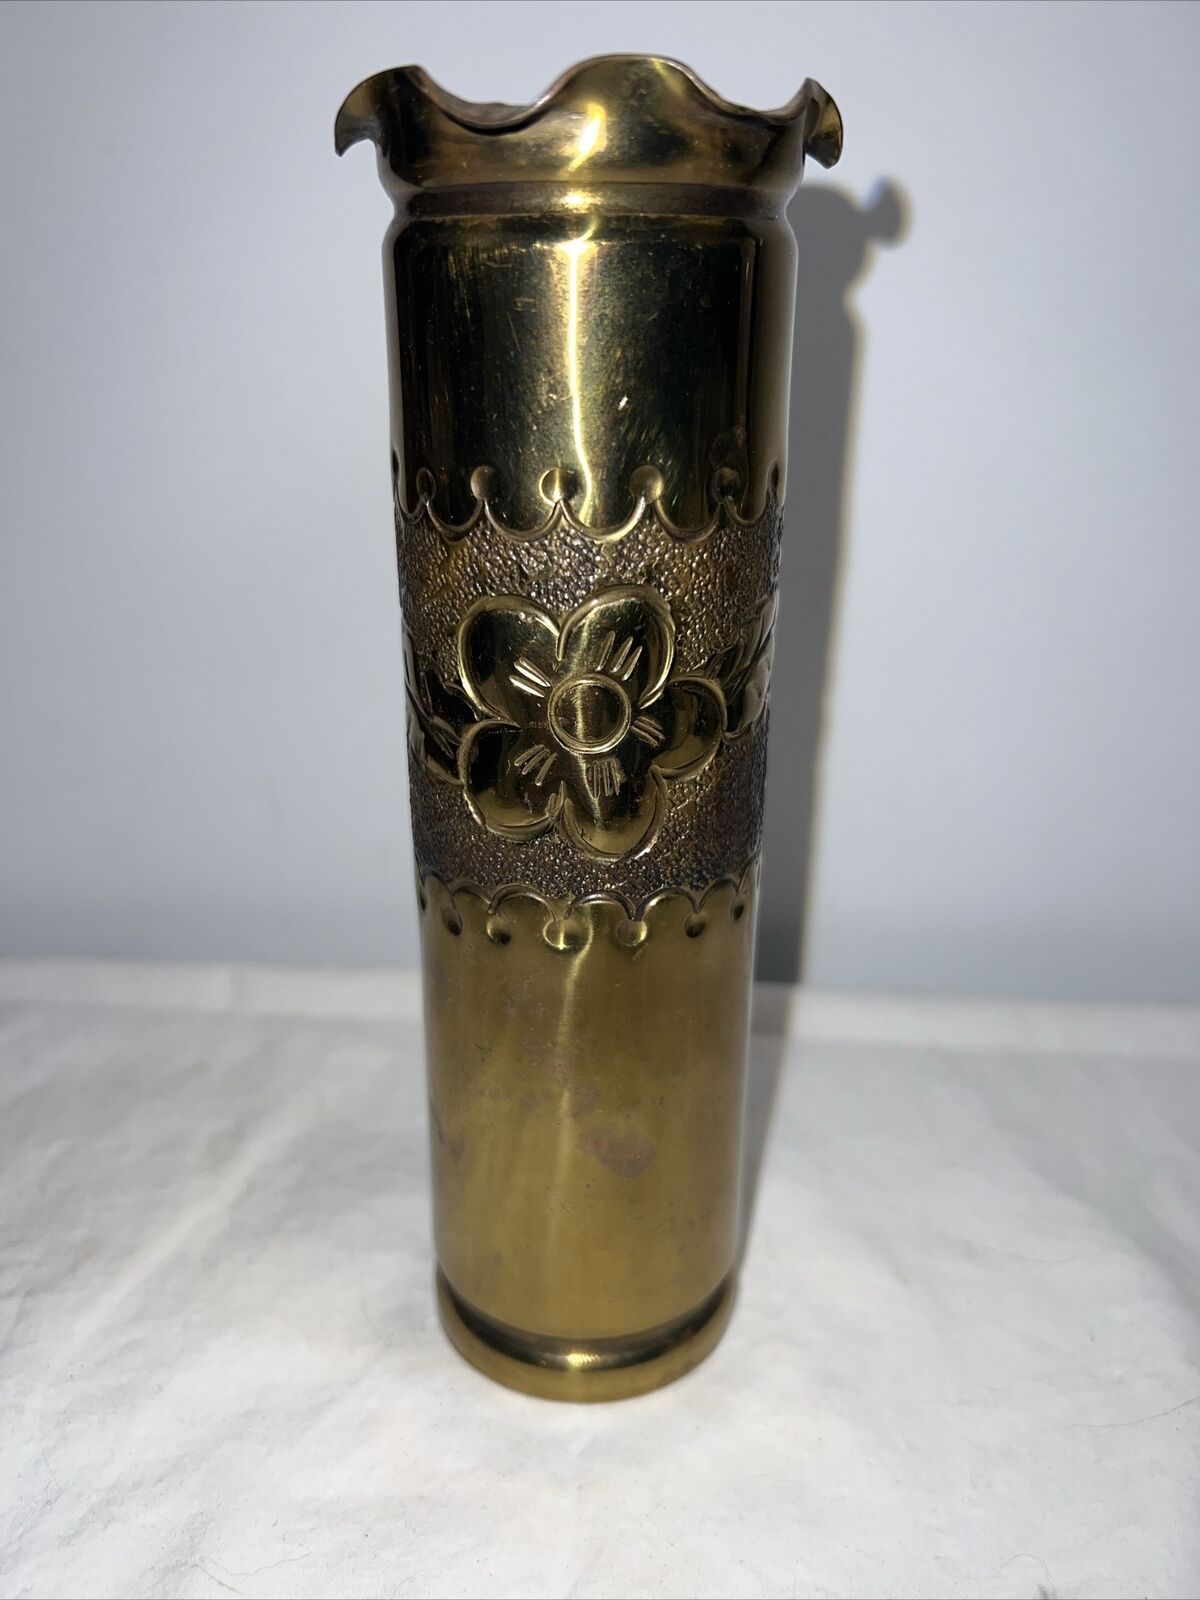 Antique WWI Trench Art Vase Shell Casing Militaria